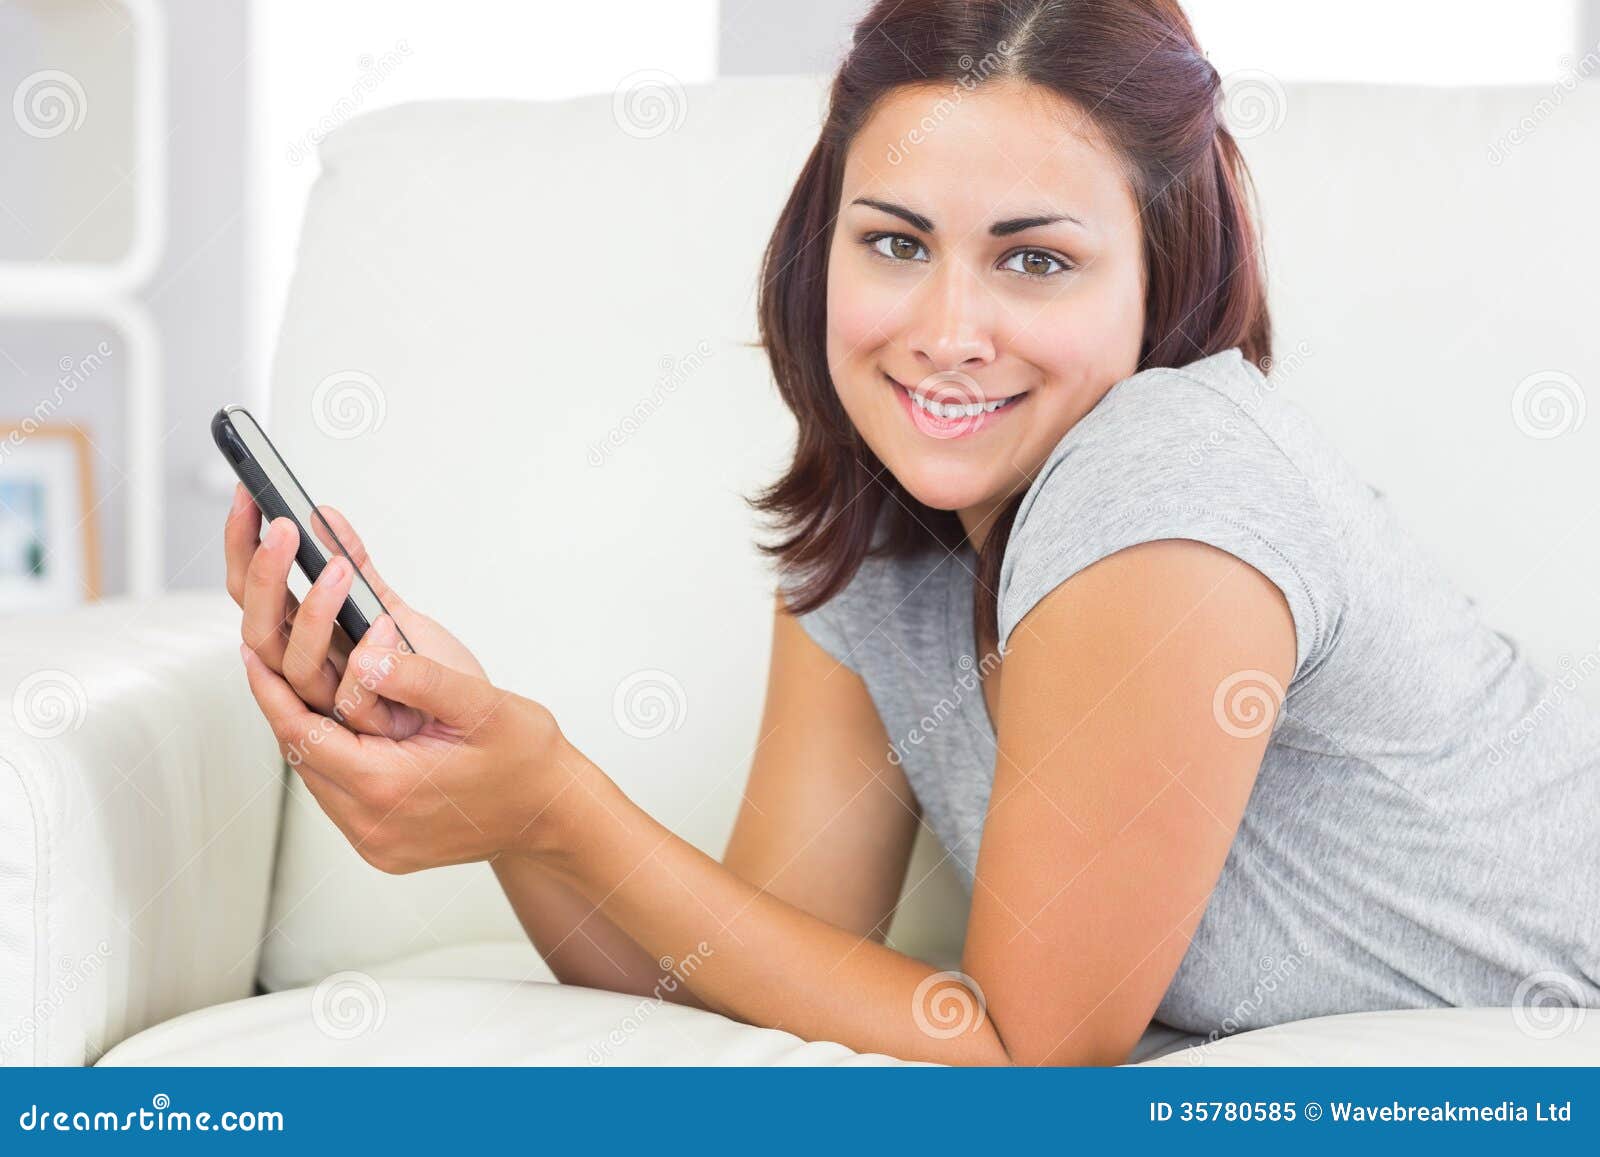 Woman On Couch In Living Room